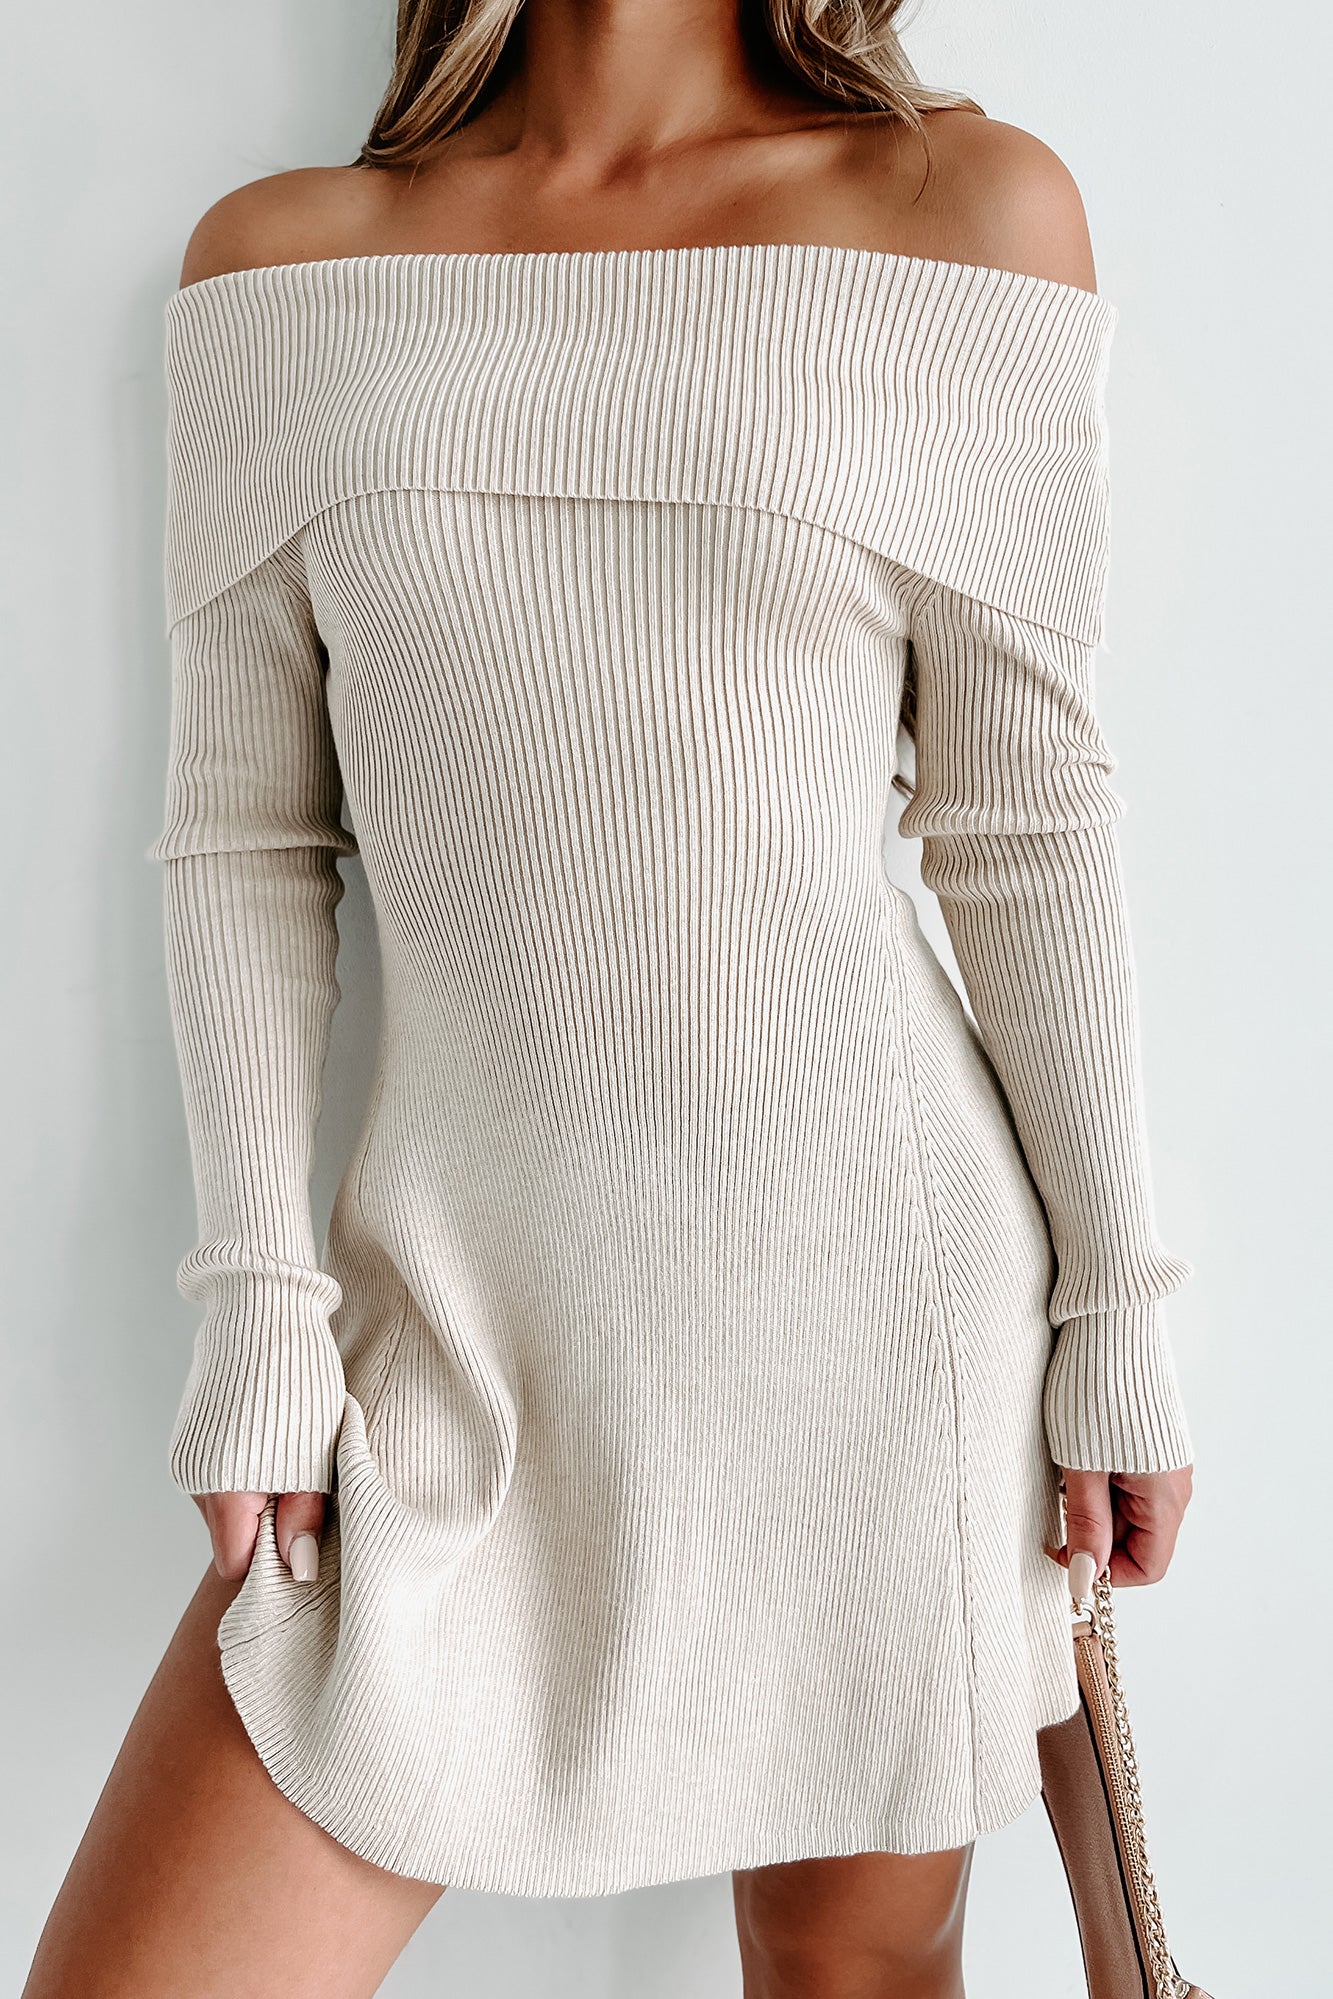 Lost In A Memory Off The Shoulder Sweater Dress (Oatmeal) - NanaMacs